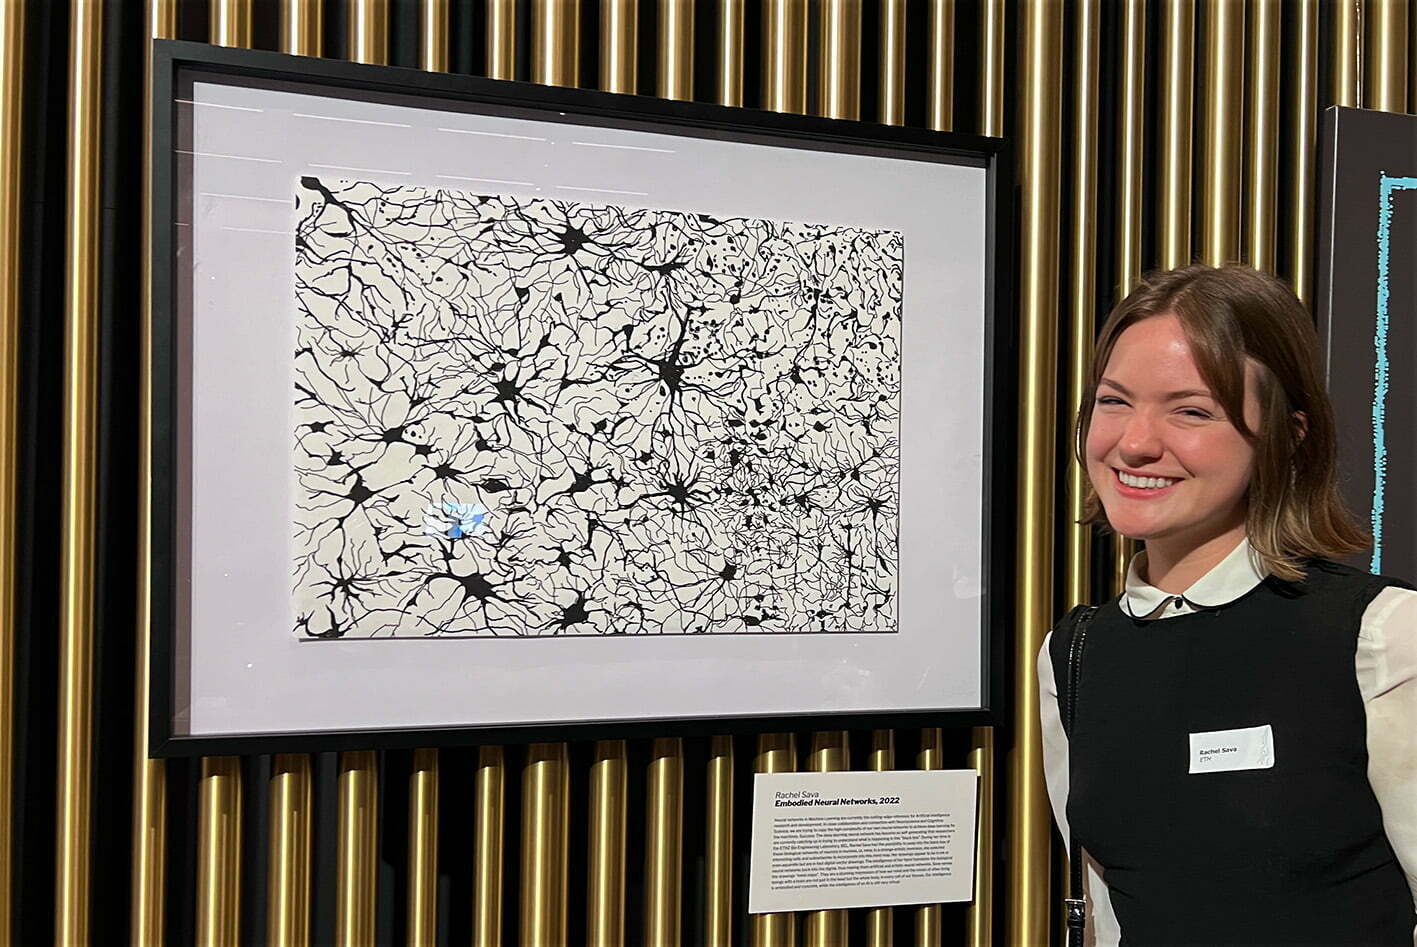 ETH Zurich Foundation, Science artworks for a good cause